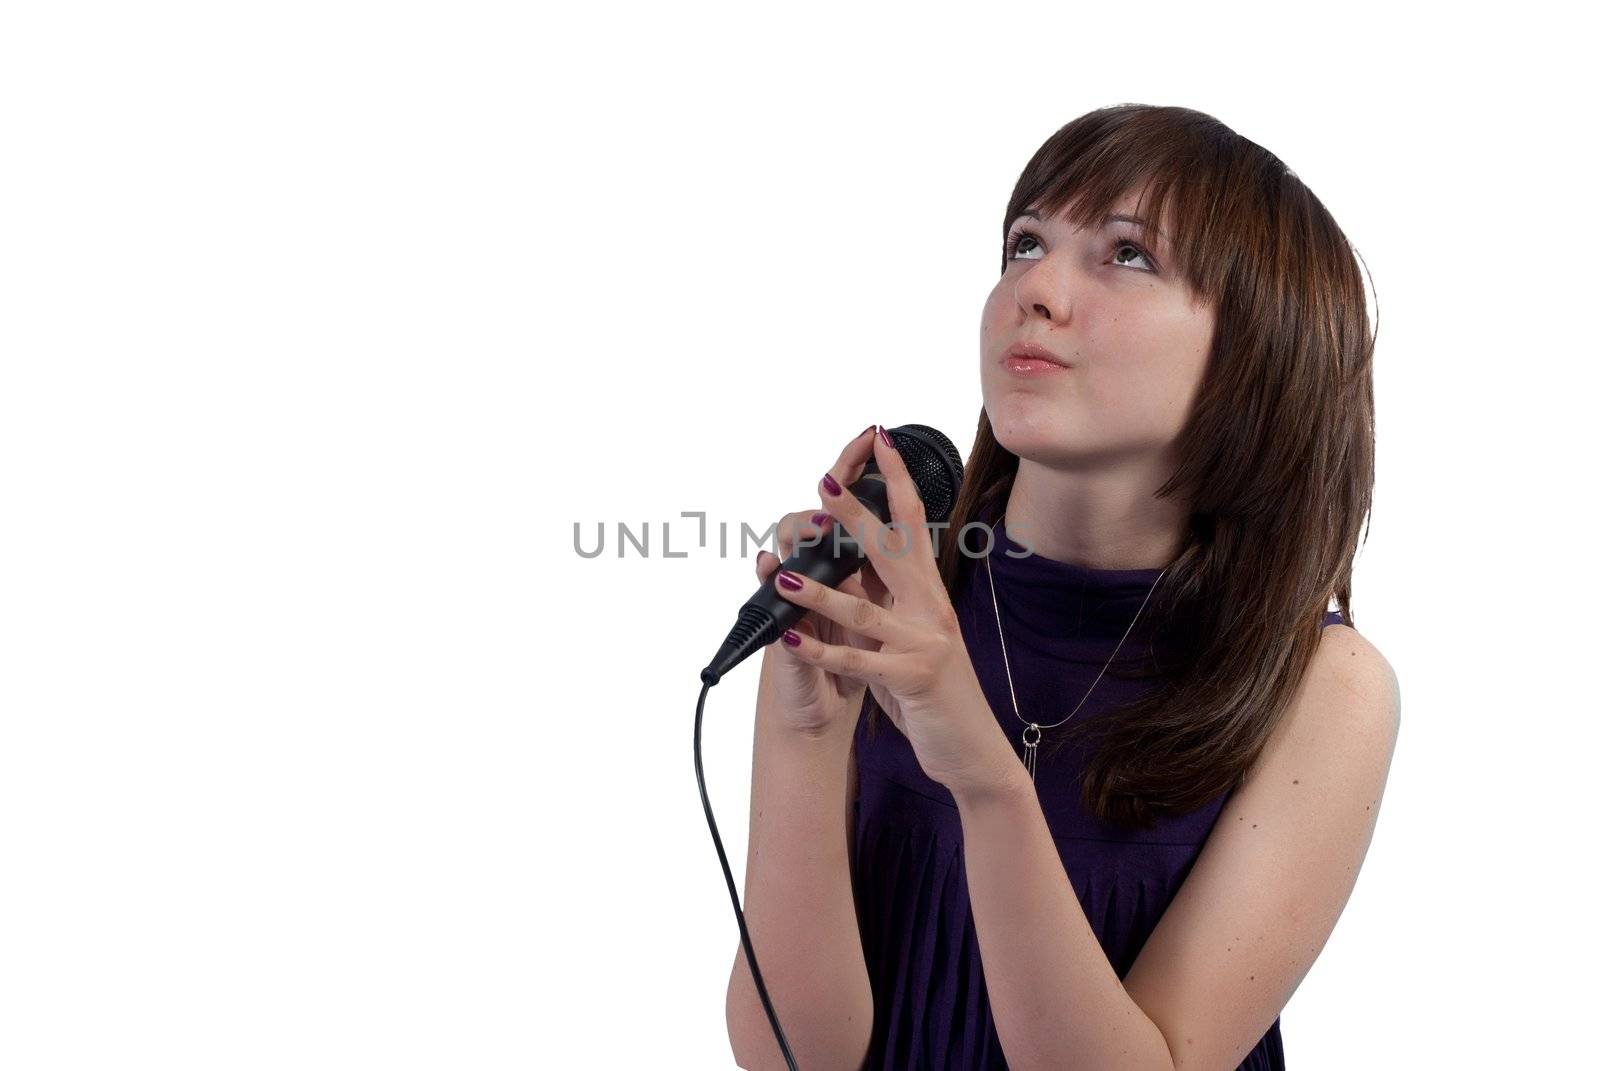 Cute girl singing into a microphone on a white background